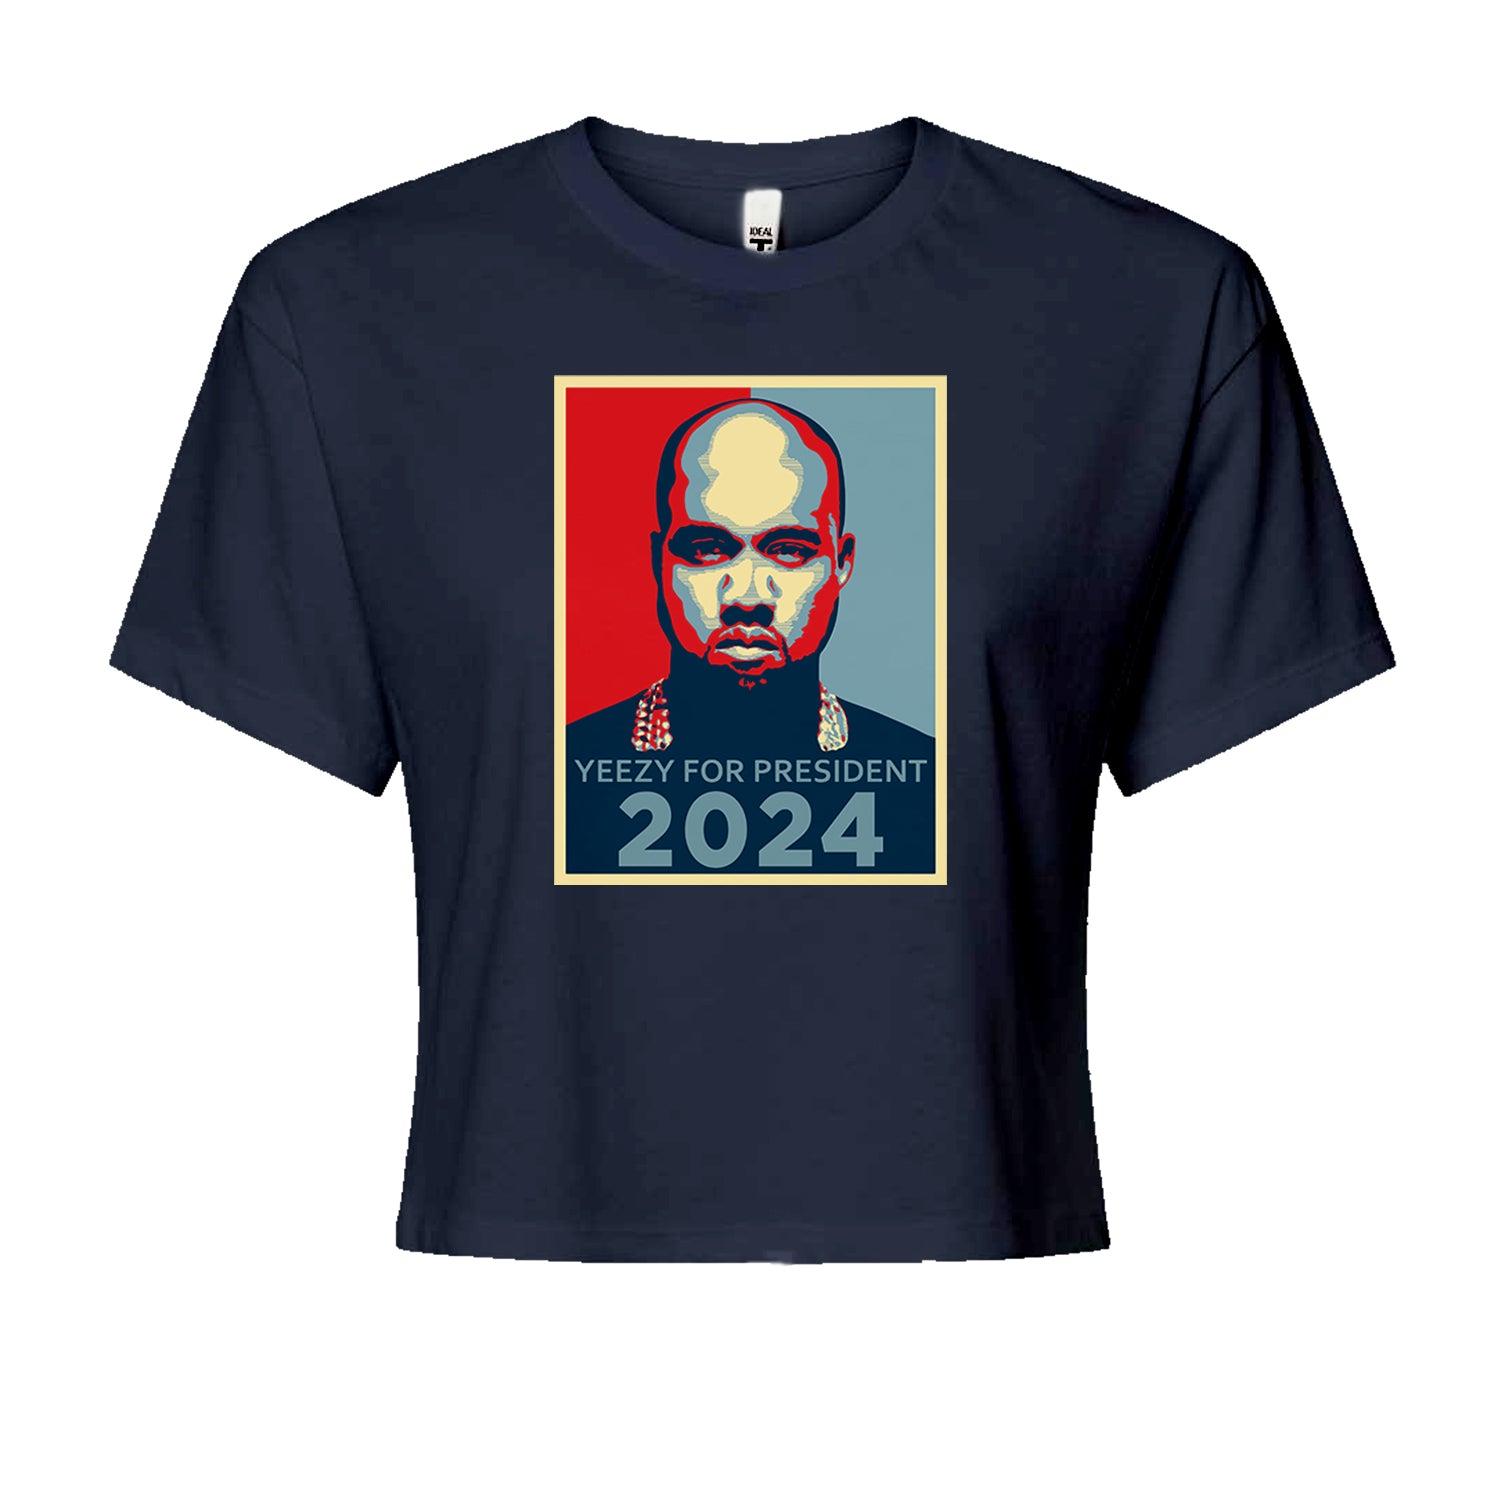 Yeezus For President Vote for Ye Cropped T-Shirt Navy Blue